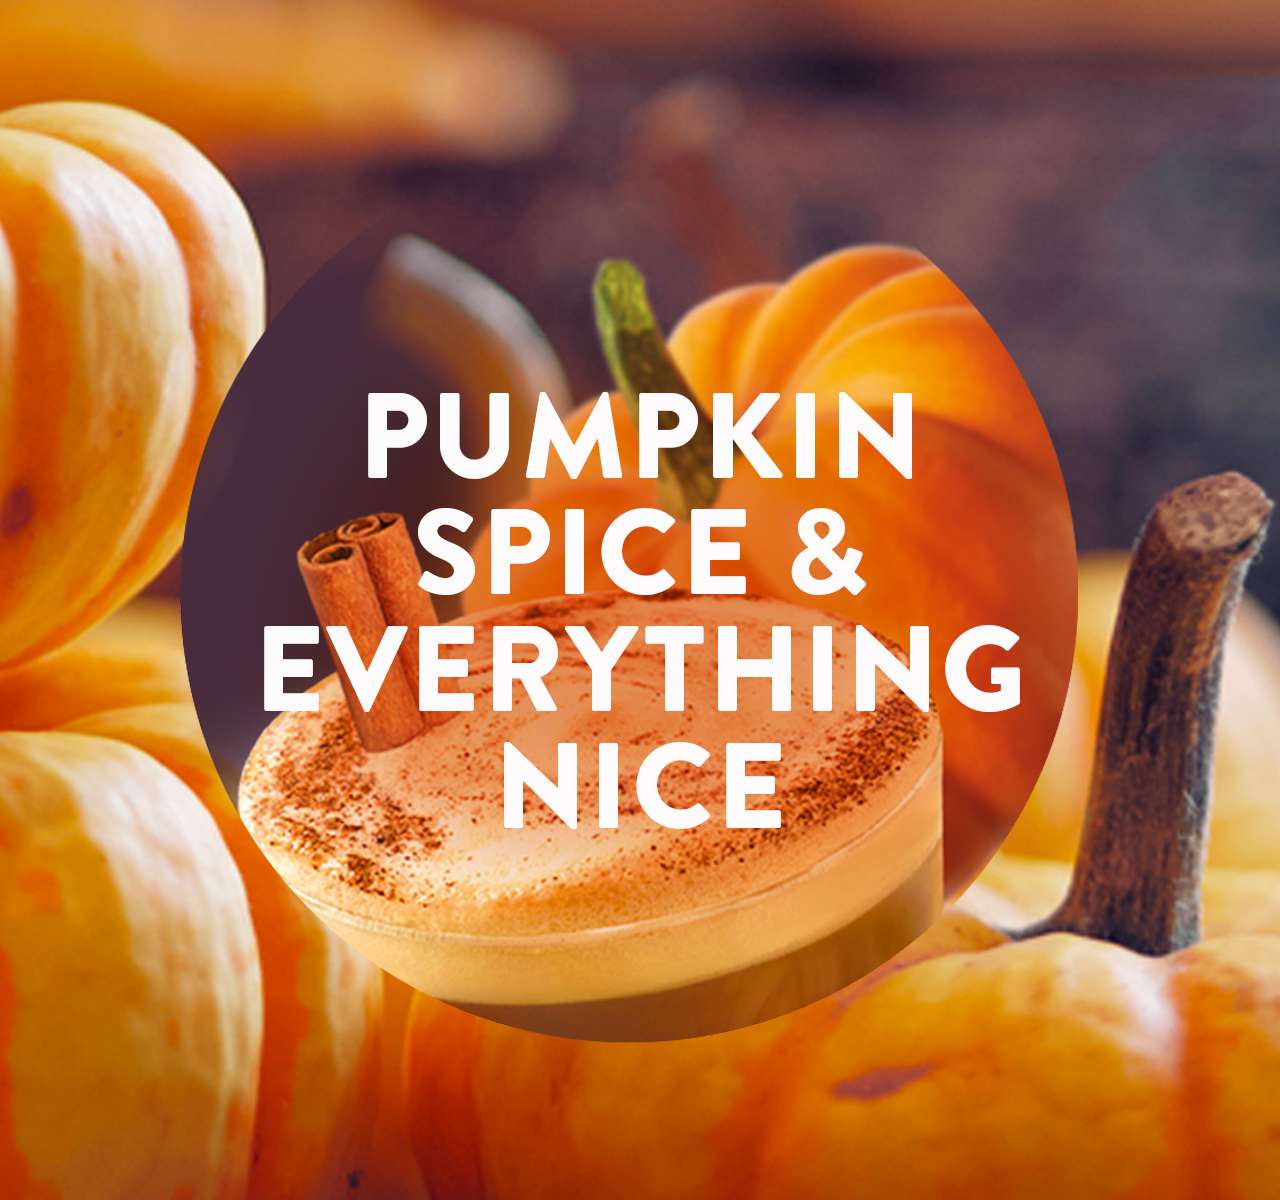 Spiced Pumpkin the fragrance for Air Wick Air Freshener Pumpkin Spice & Everything Nice